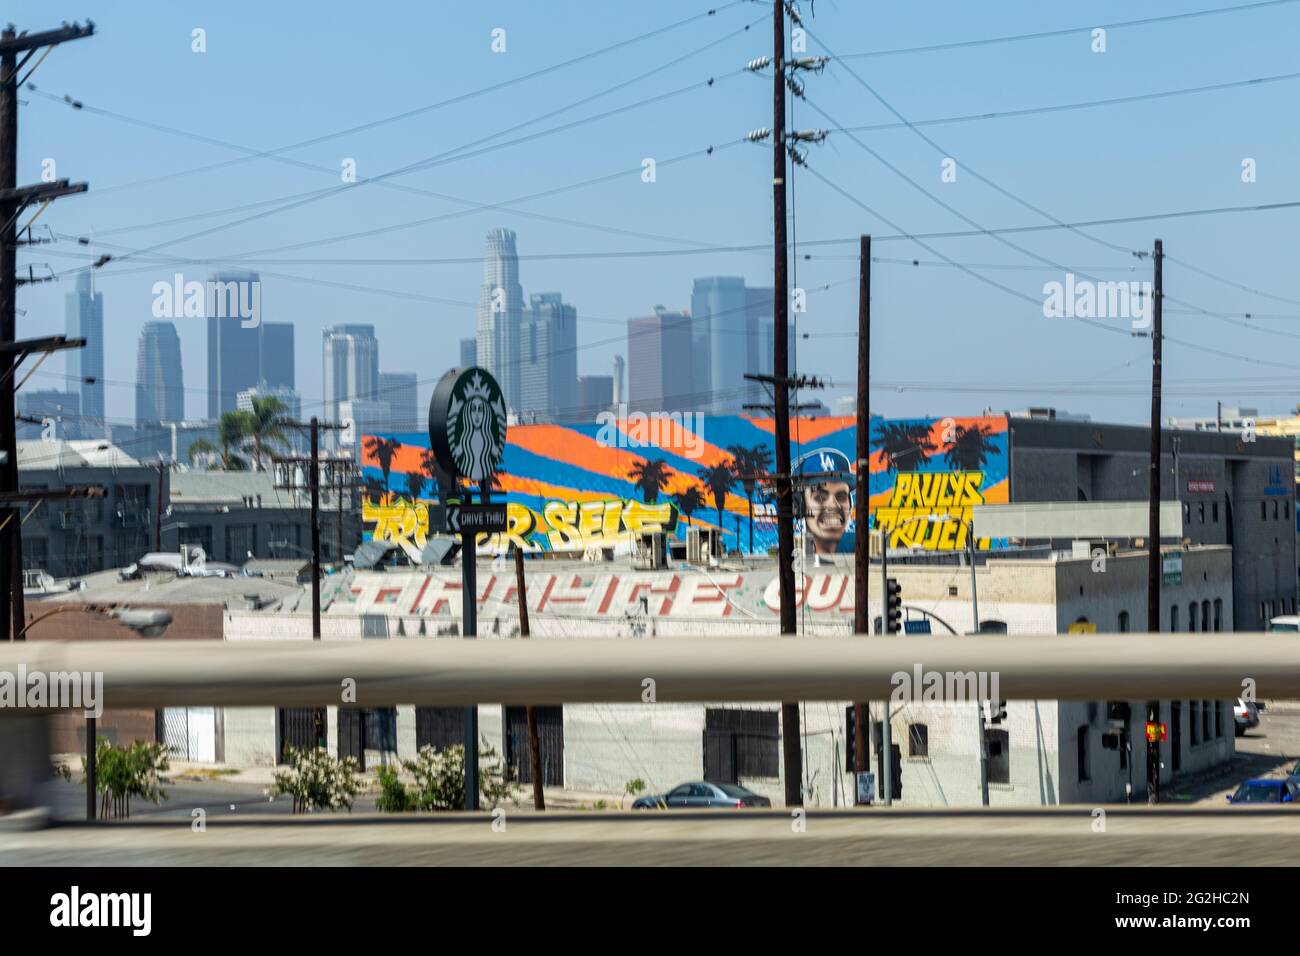 Los Angeles, Downtown, seen from the car on Interstate 10 / Santa Monica Freeway. Los Angeles, Califronia, USA Stock Photo